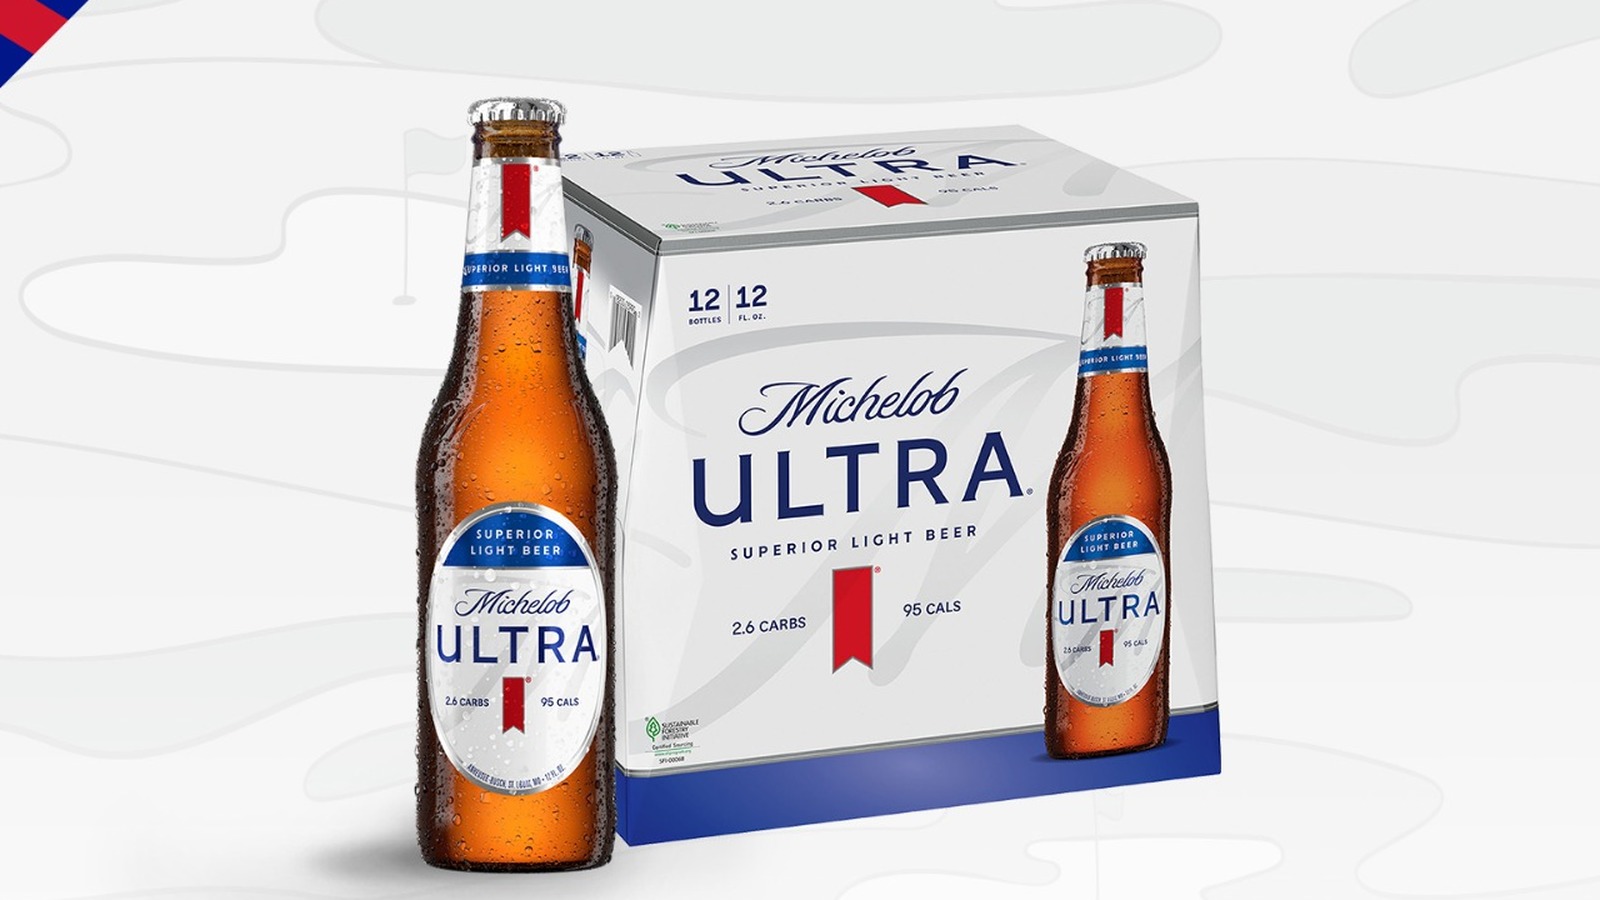 Why You Should Avoid Drinking Michelob Ultra